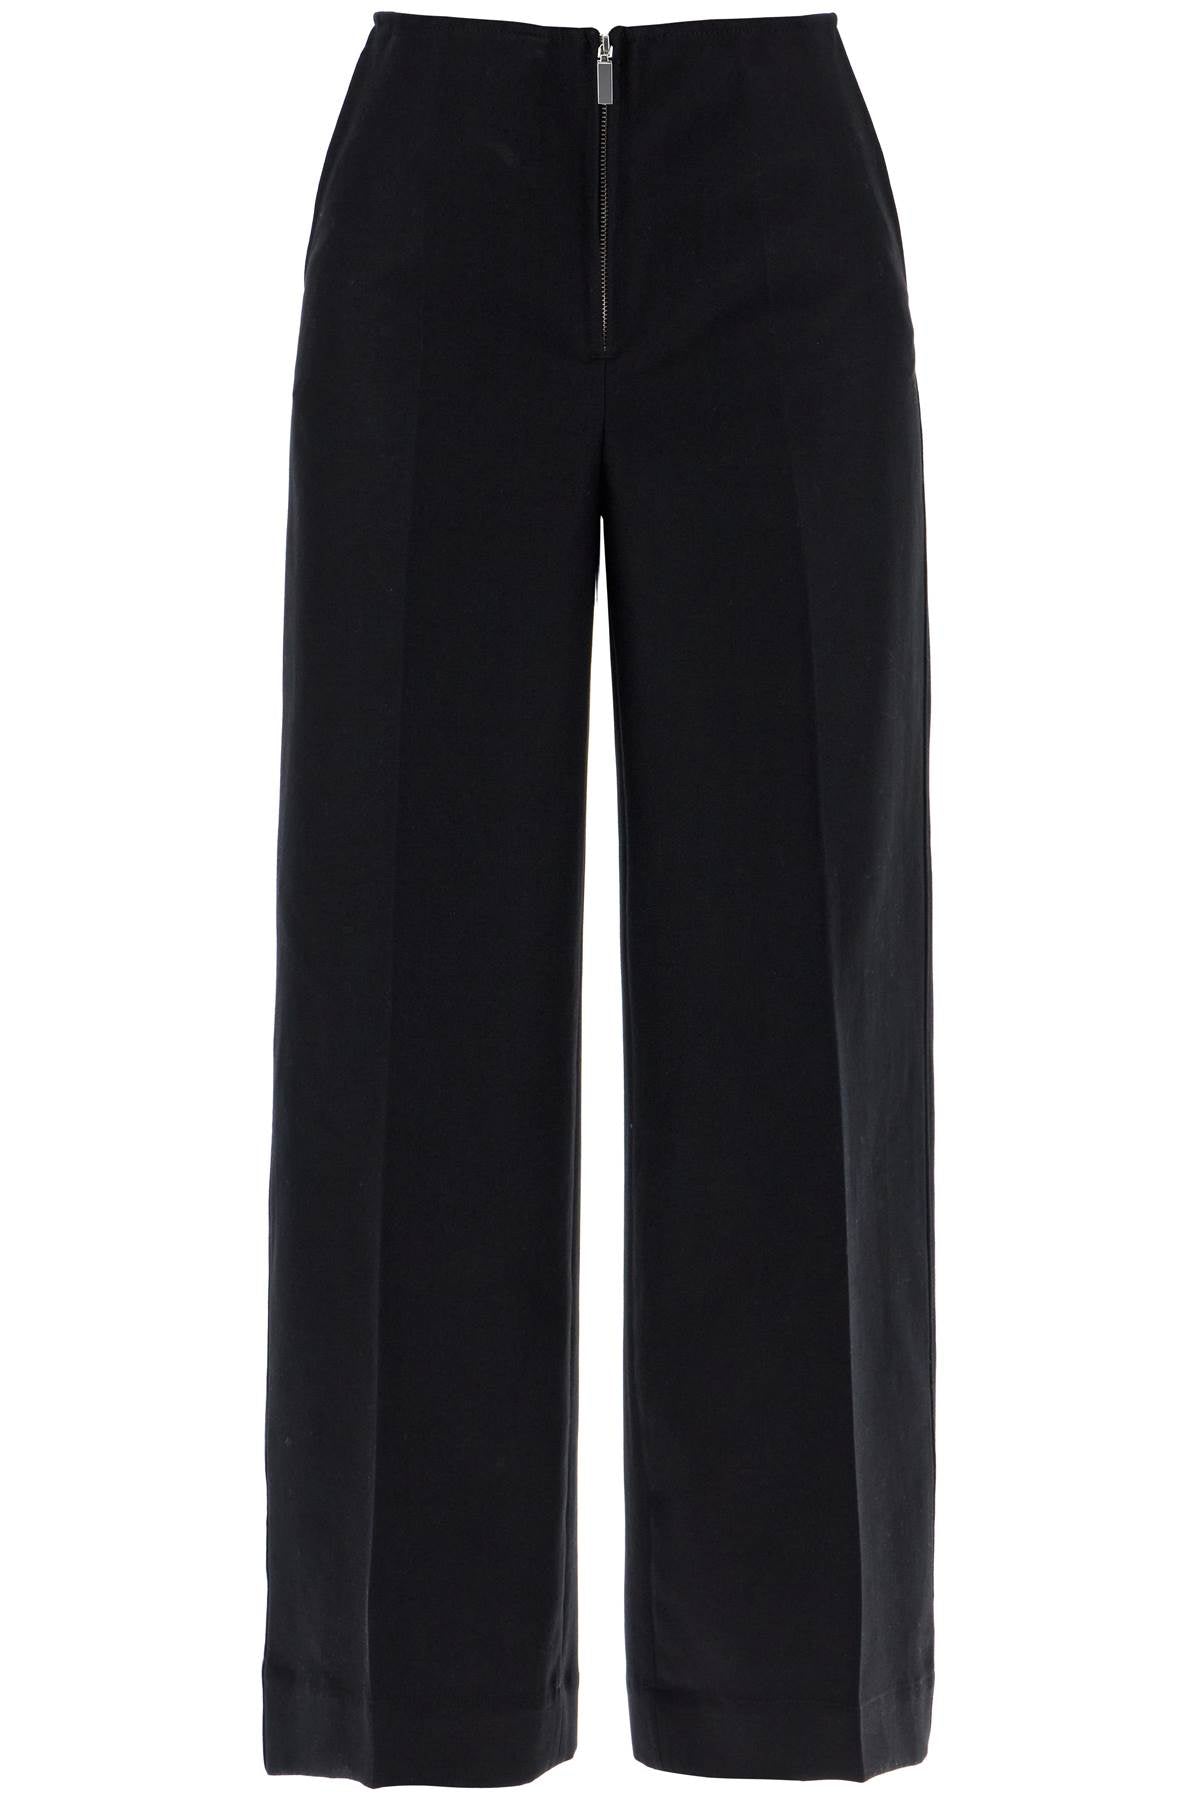 Toteme zip-front wide trousers